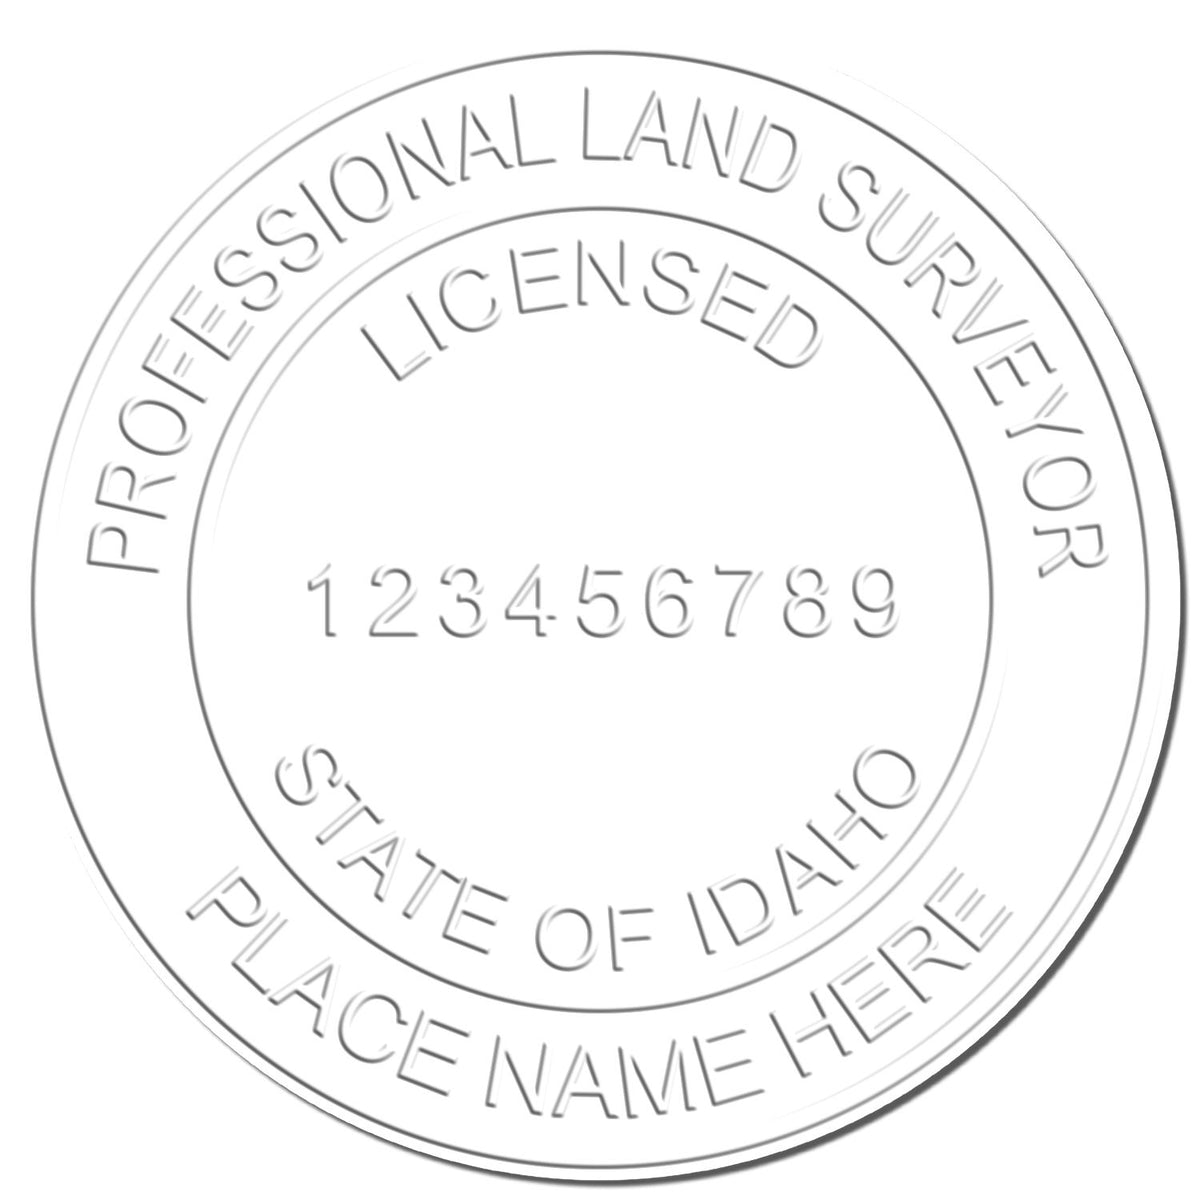 This paper is stamped with a sample imprint of the Long Reach Idaho Land Surveyor Seal, signifying its quality and reliability.